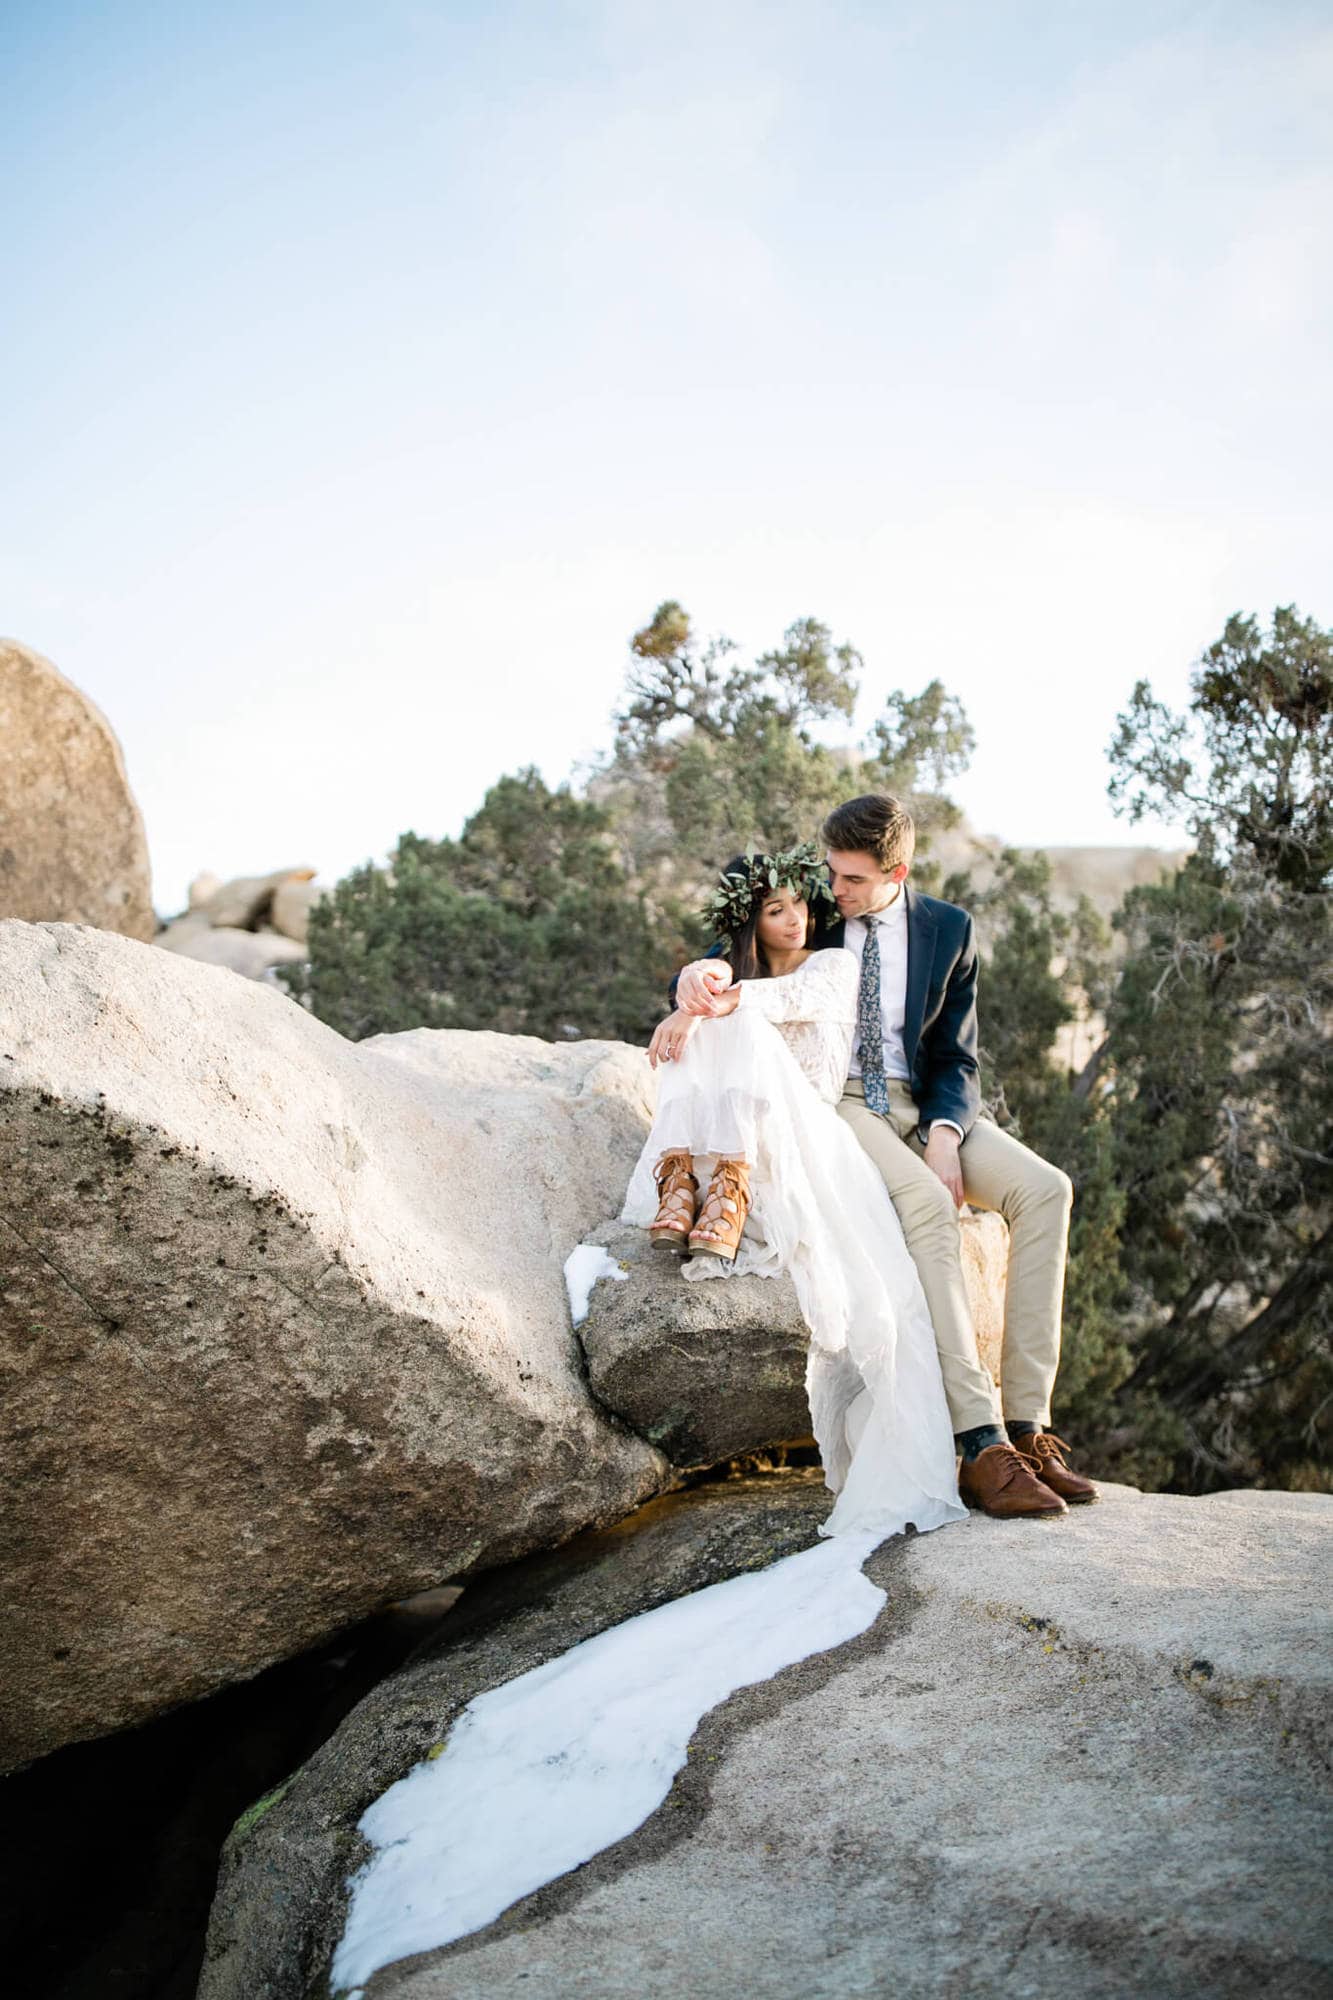 The bride and groom sit atop Joshua Tree's desert boulders. The brides wedding dress blends into a pile of snow, looking like a long train.